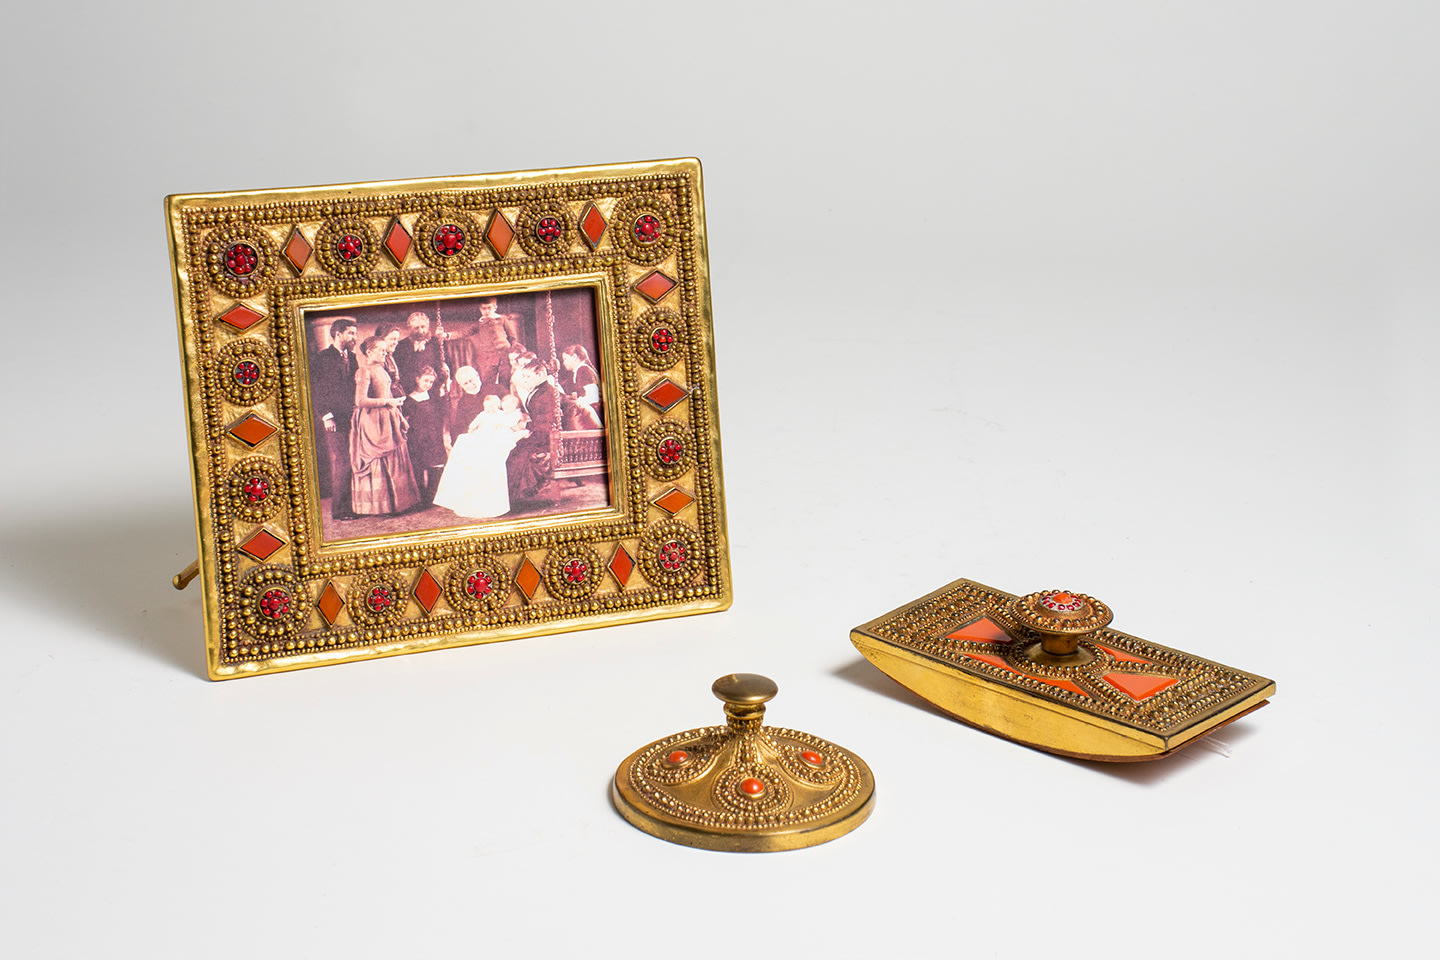 a gilt bronze desk set by tiffany studios in the BYZANTINE pattern, with inset red pieces of glass mimicking enamel and stone work with elaborate raised metalwork details